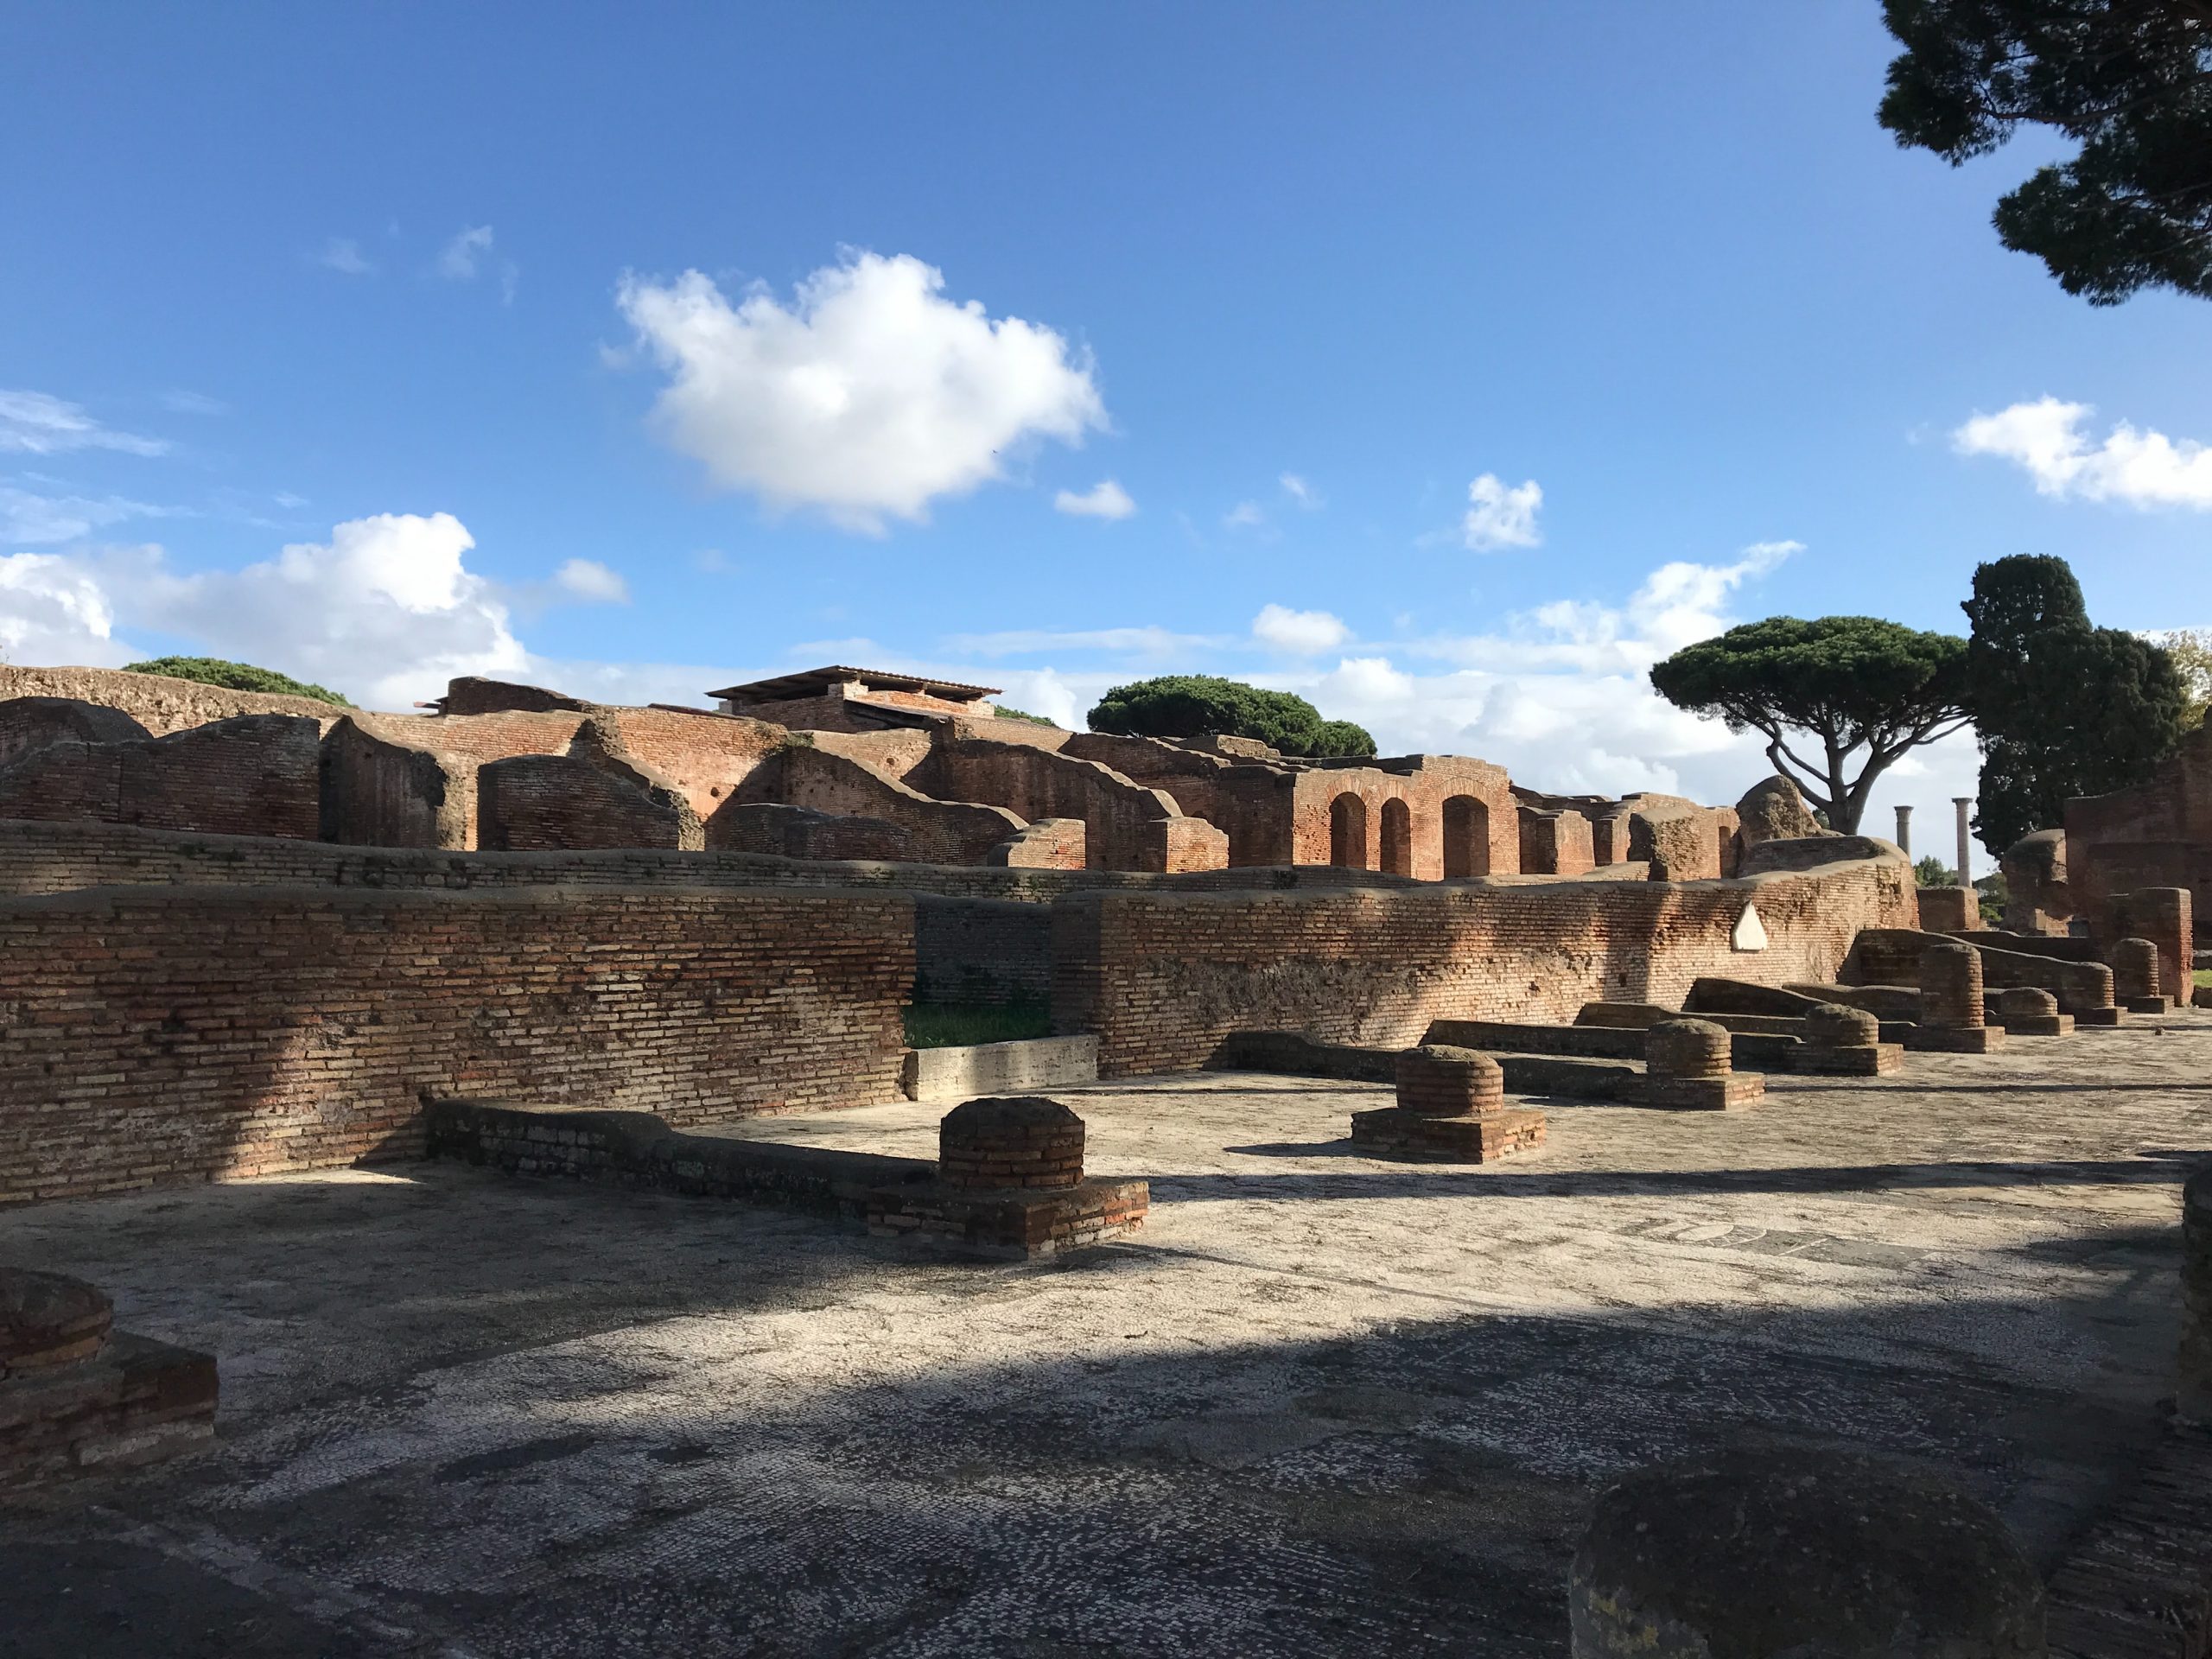 Ostia Antica - a great place for a day trip from Rome